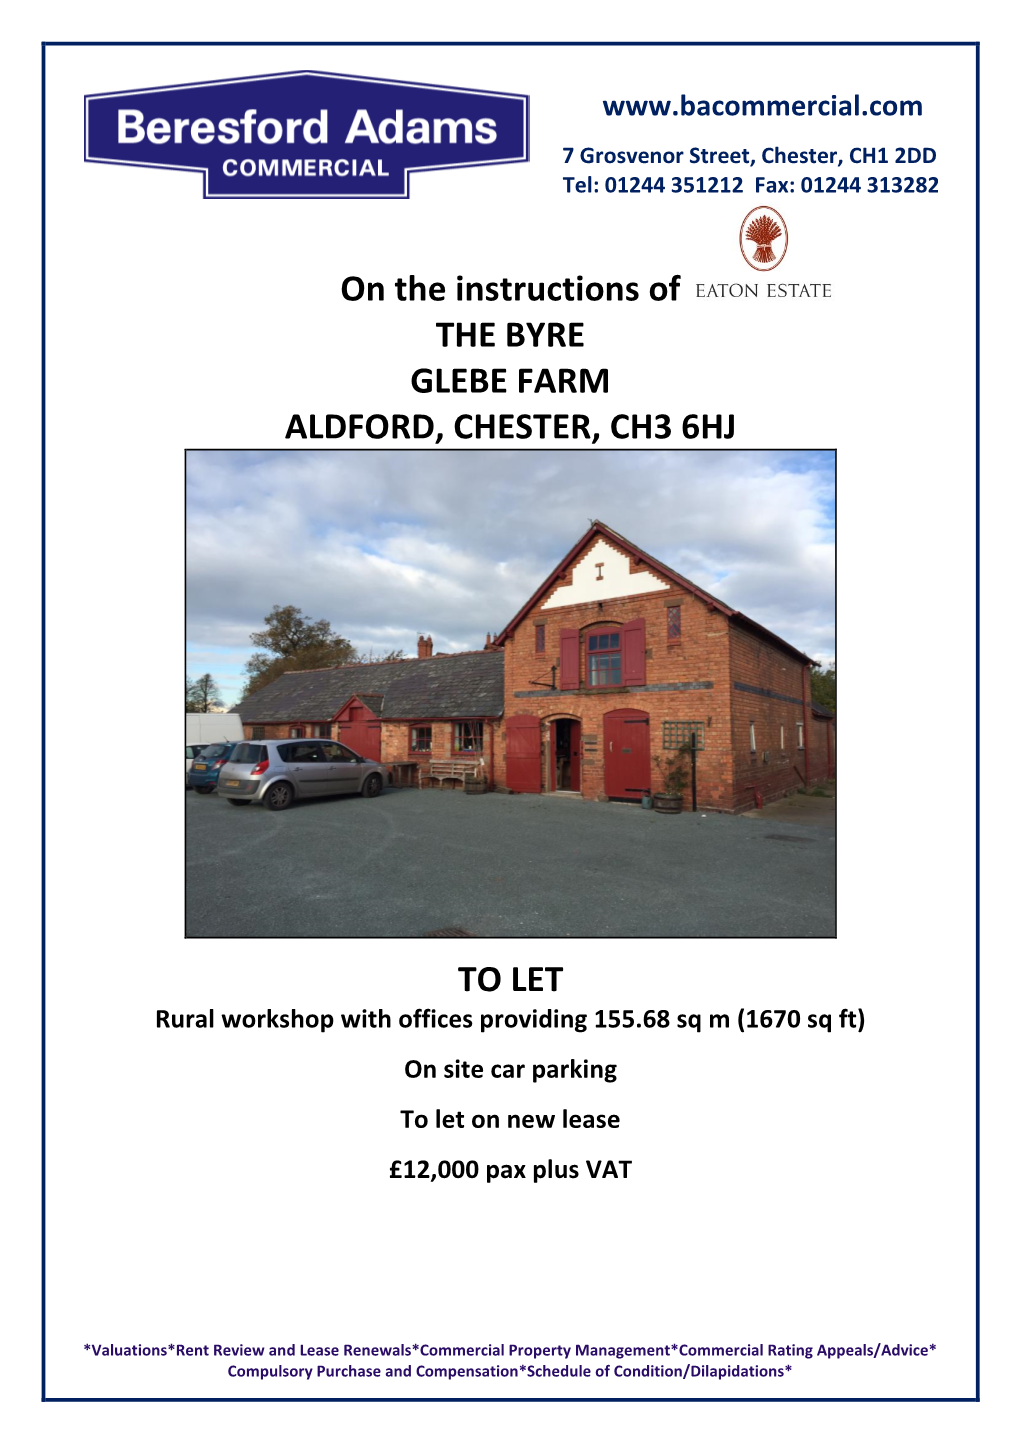 On the Instructions of the BYRE GLEBE FARM ALDFORD, CHESTER, CH3 6HJ